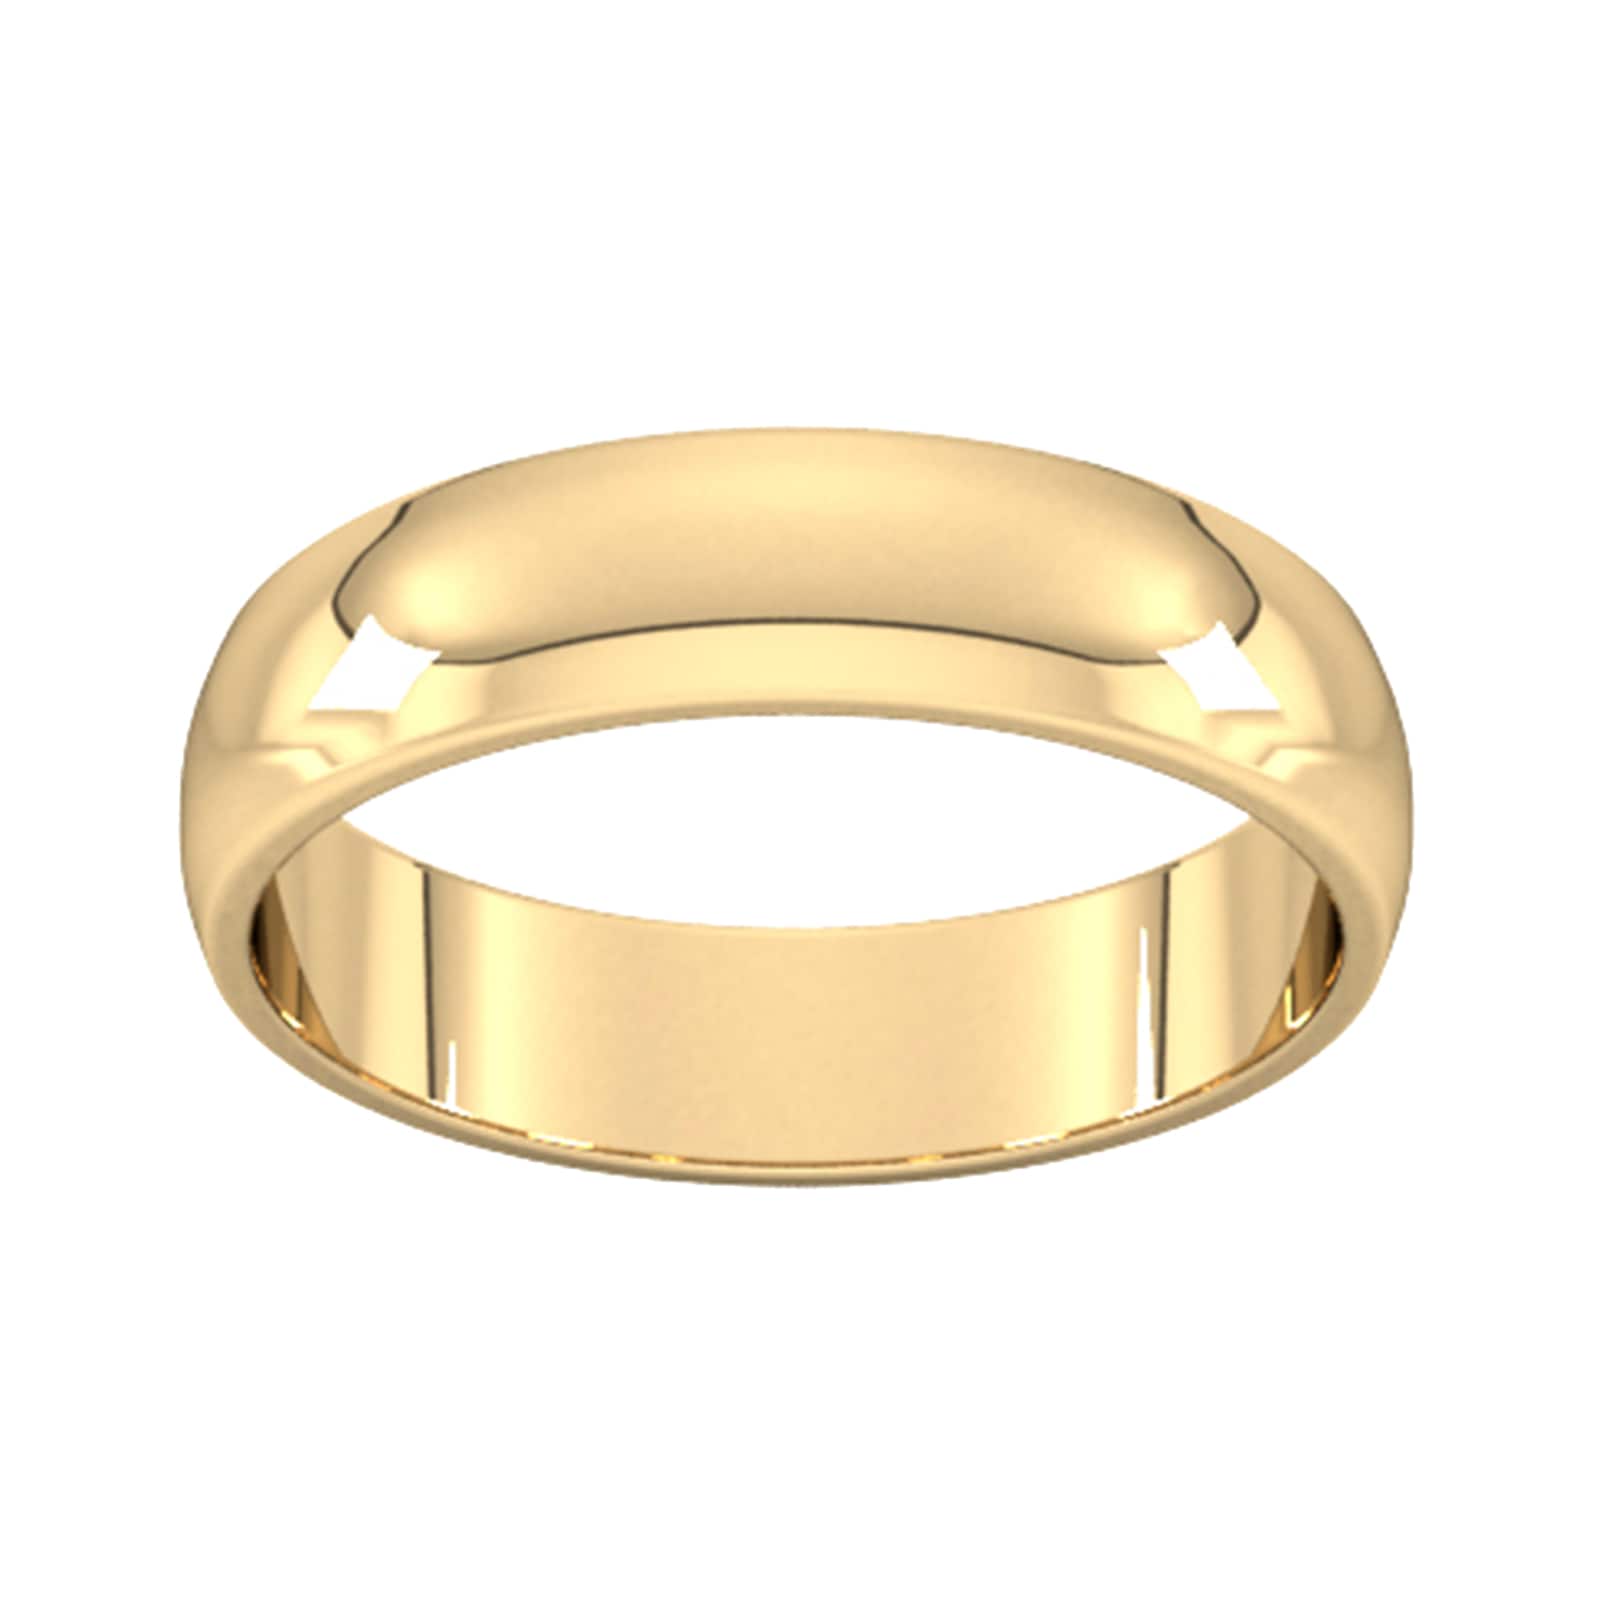 5mm D Shape Standard Wedding Ring In 9 Carat Yellow Gold - Ring Size O